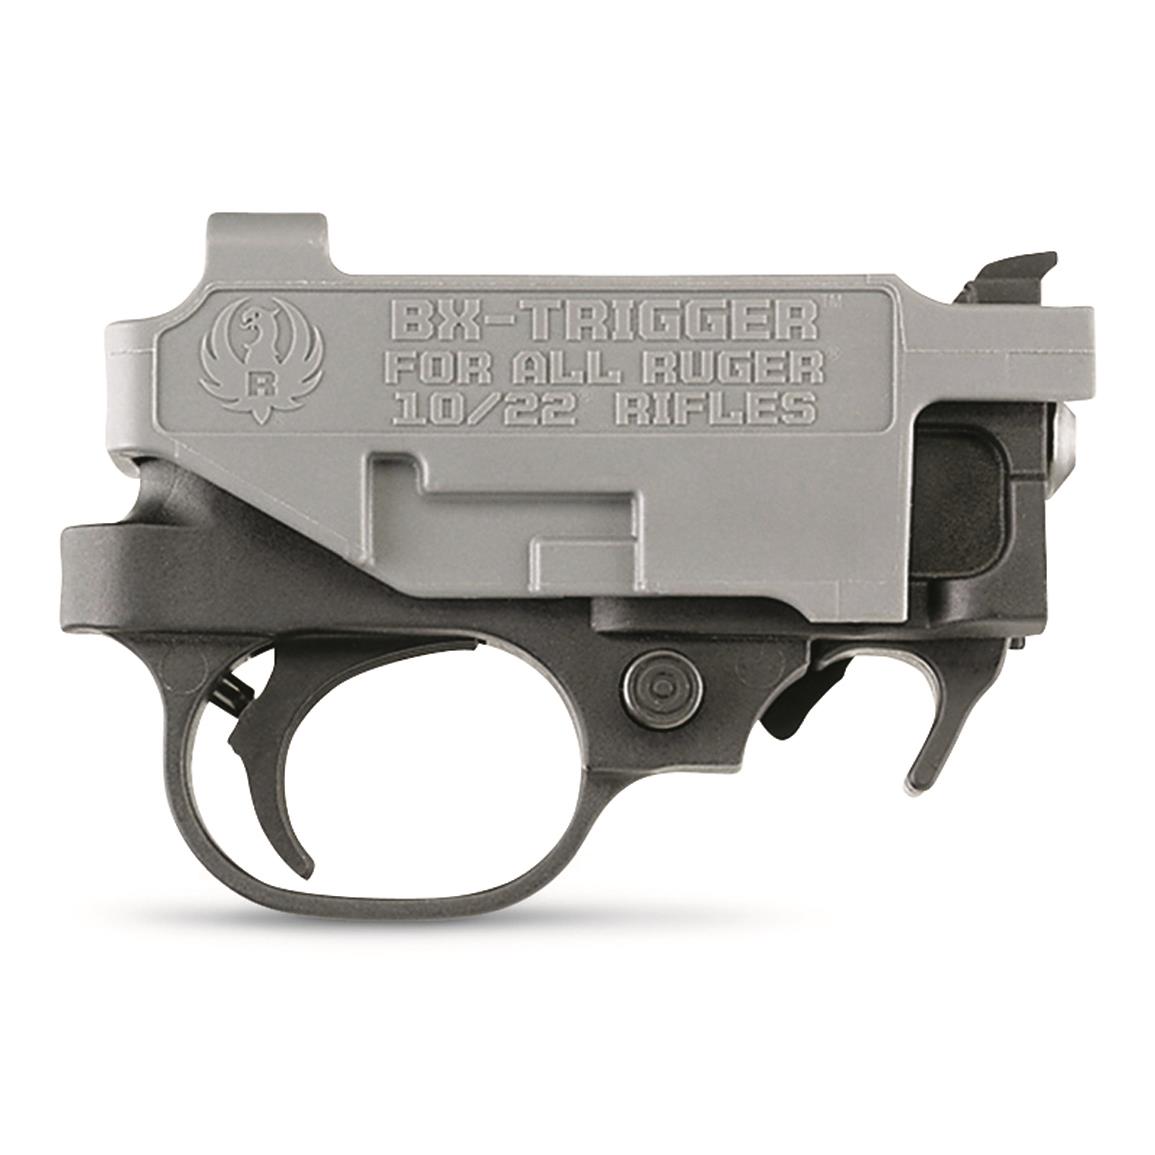 Ruger BX-Trigger for 10/22 and 22 Charger